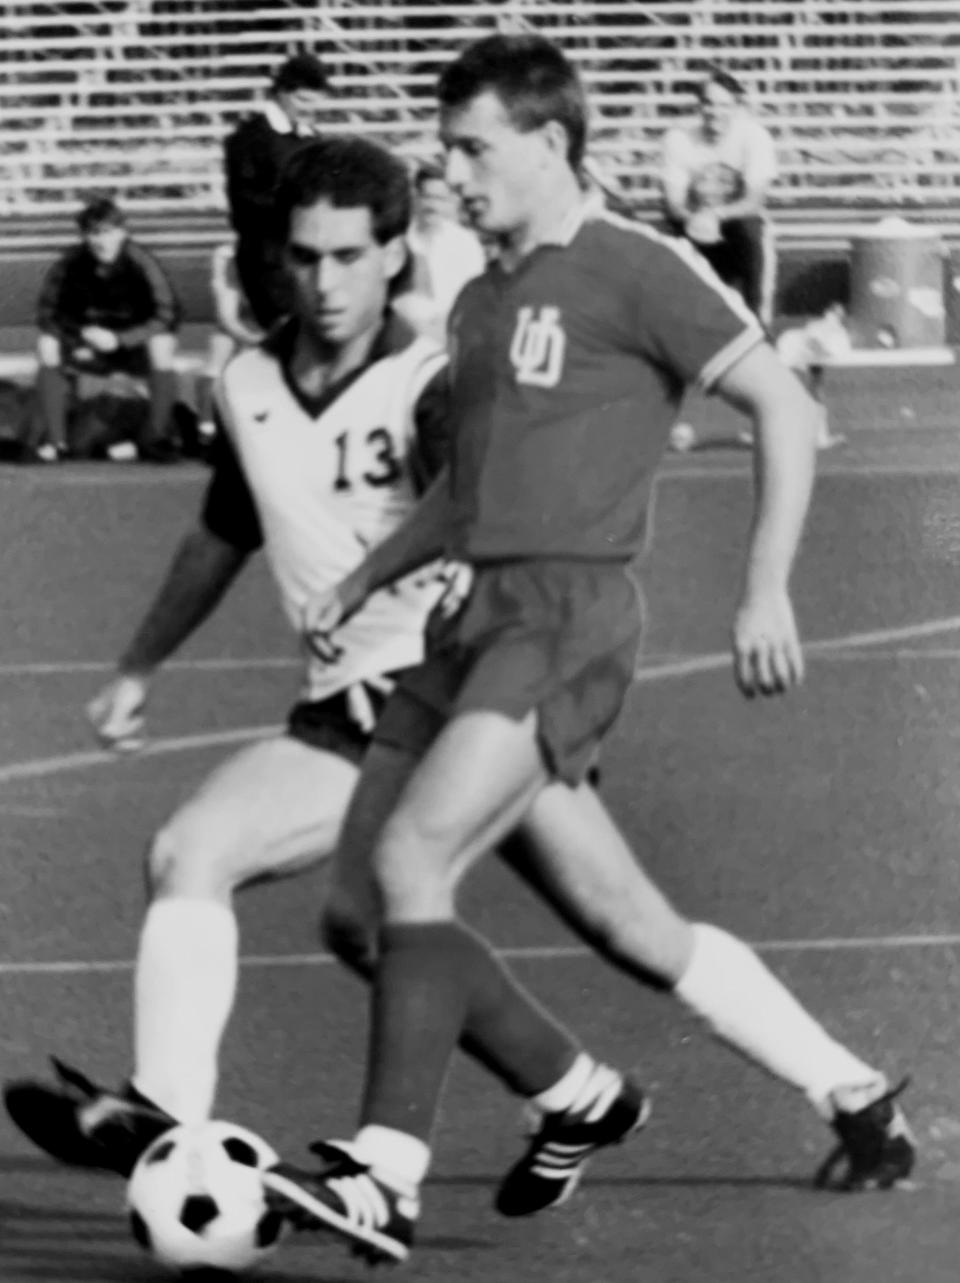 Anthony Casale will be inducted into the South Jersey Soccer Hall of Fame on May 19.